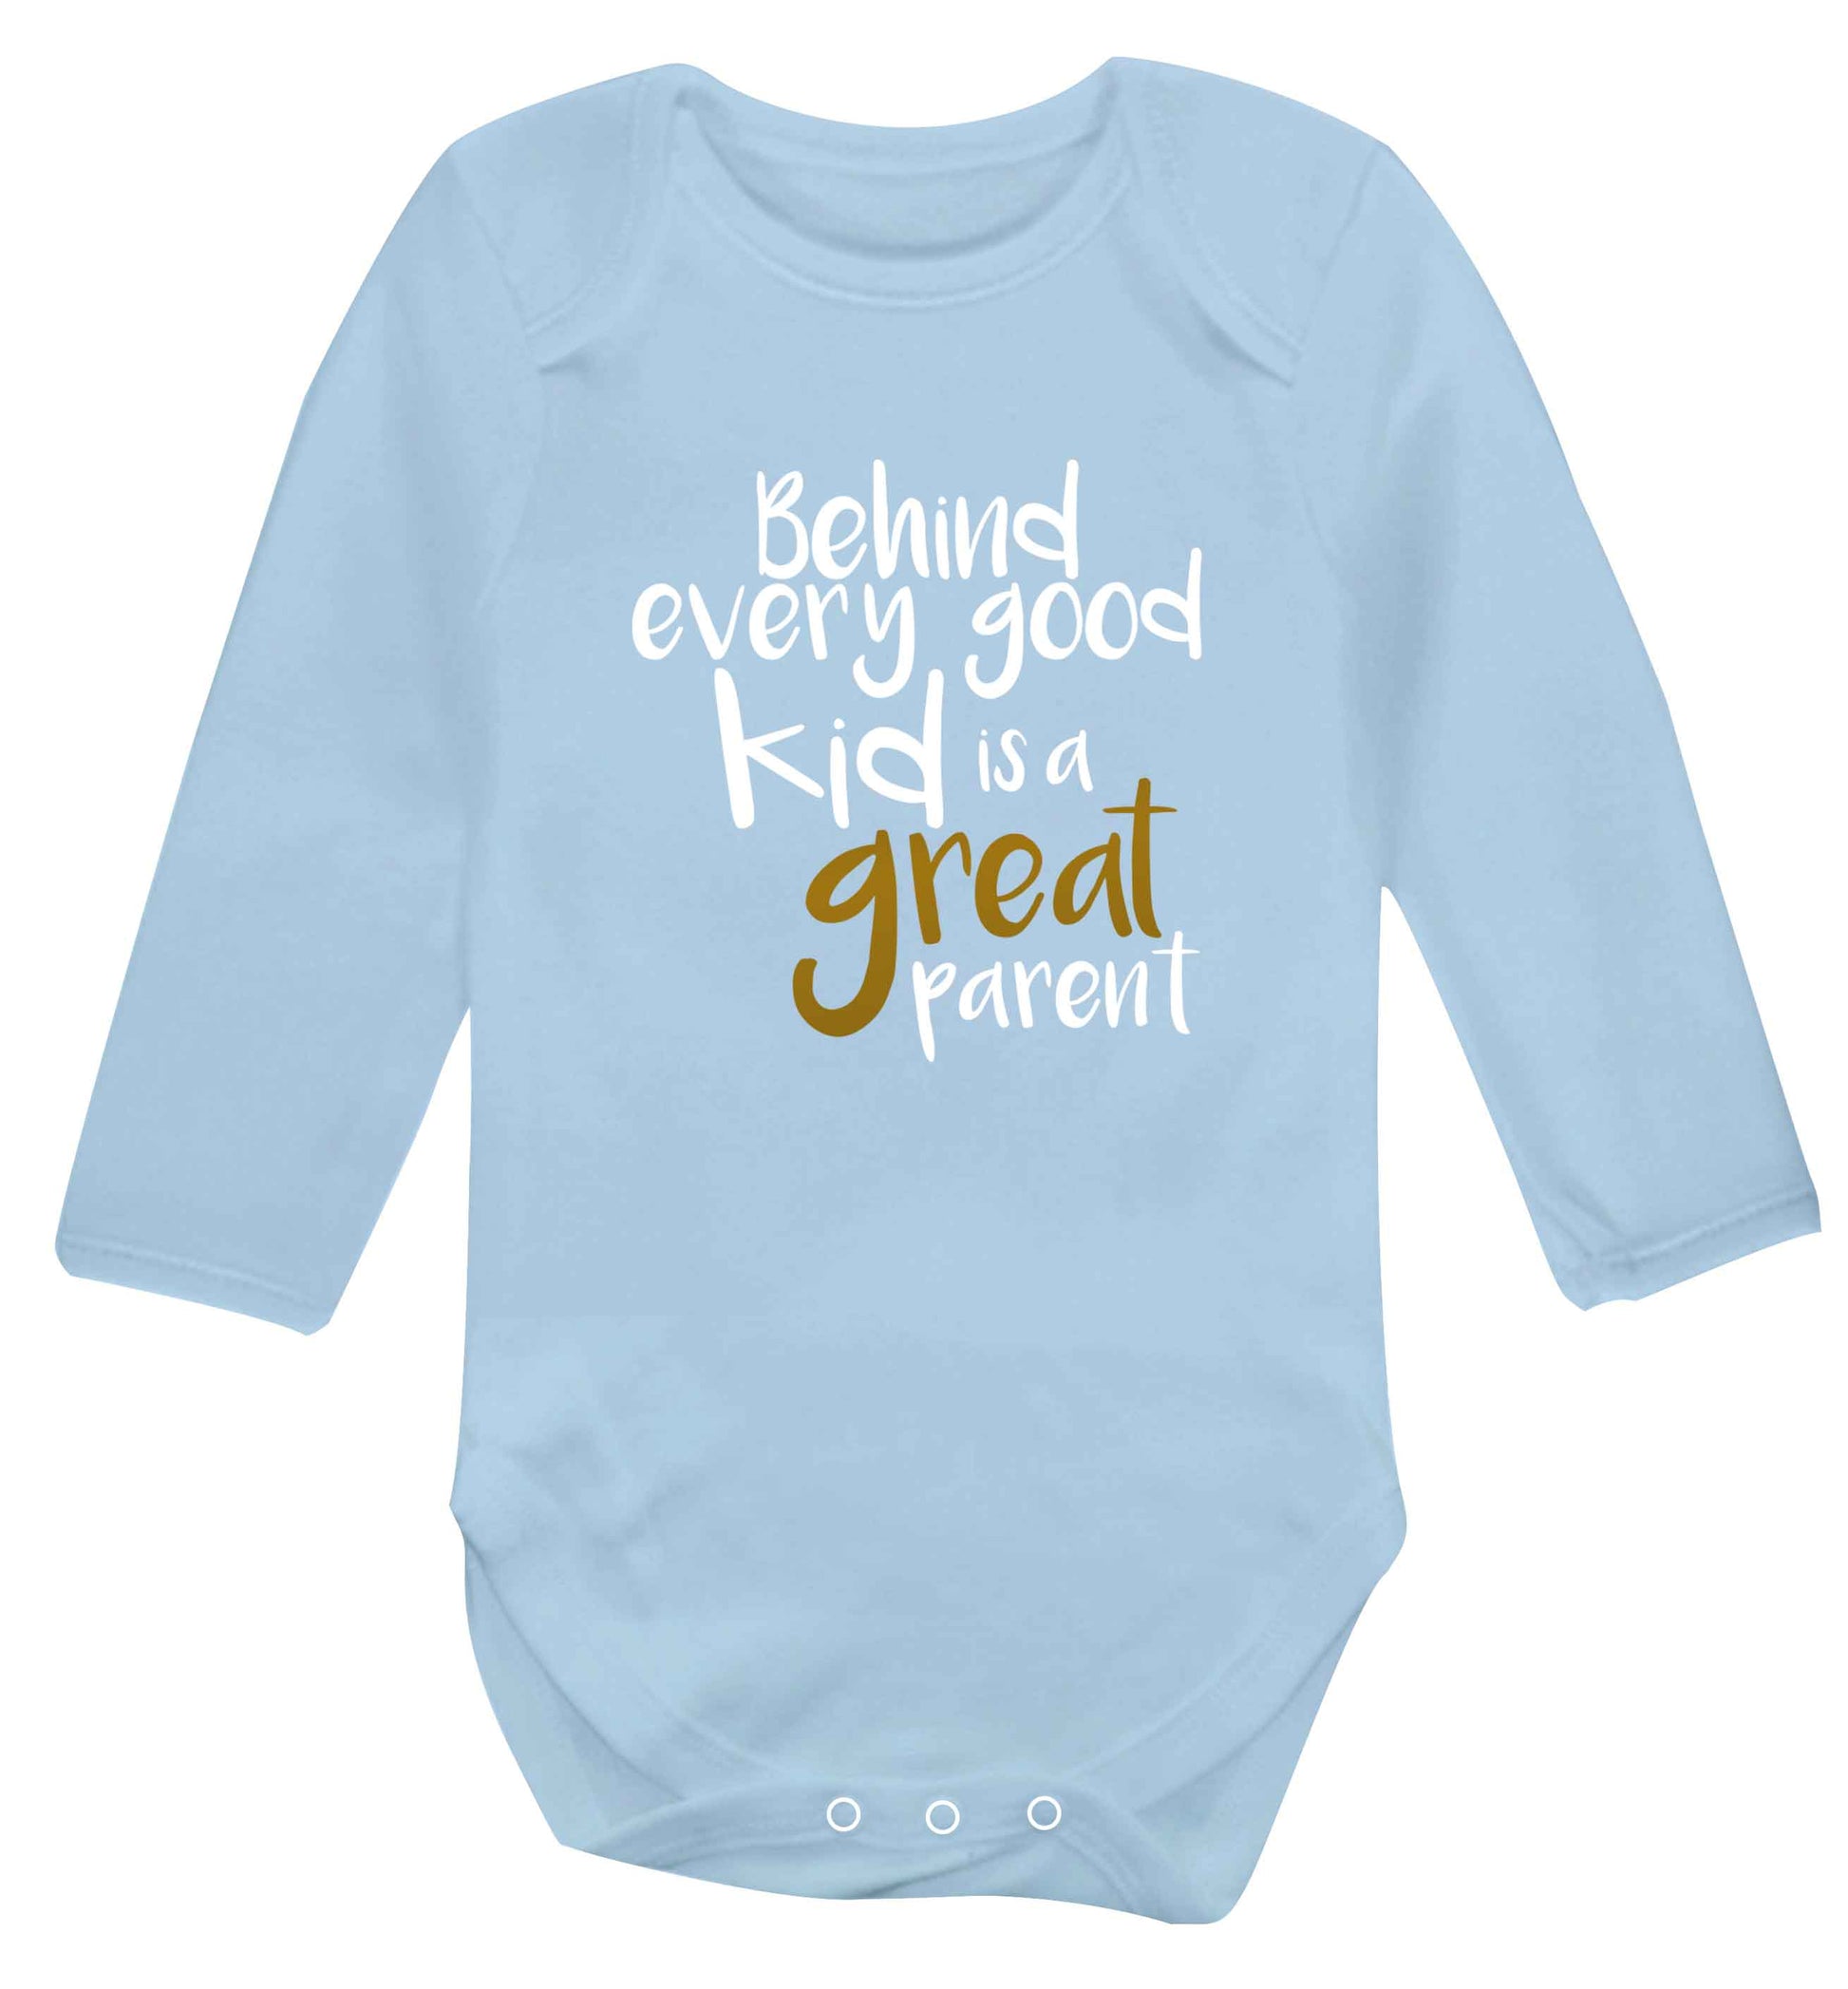 Behind every good kid is a great parent baby vest long sleeved pale blue 6-12 months